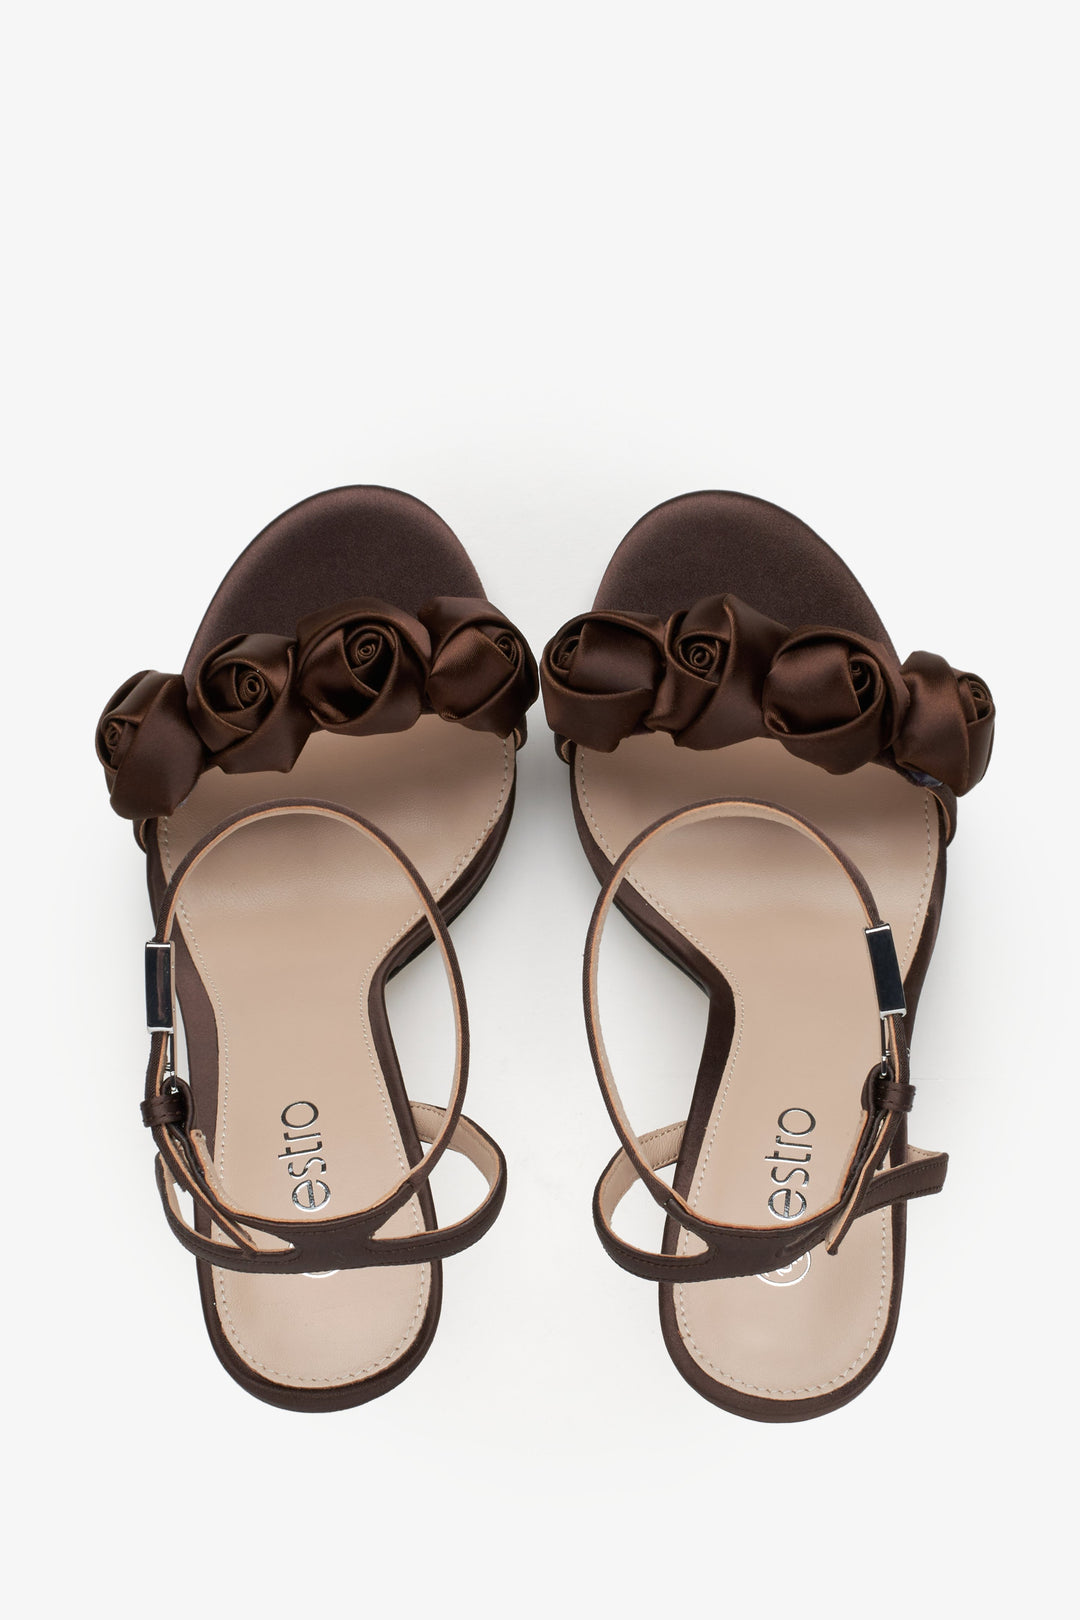 Women's dark brown sandals with floral ornamented heels - top view presentation.